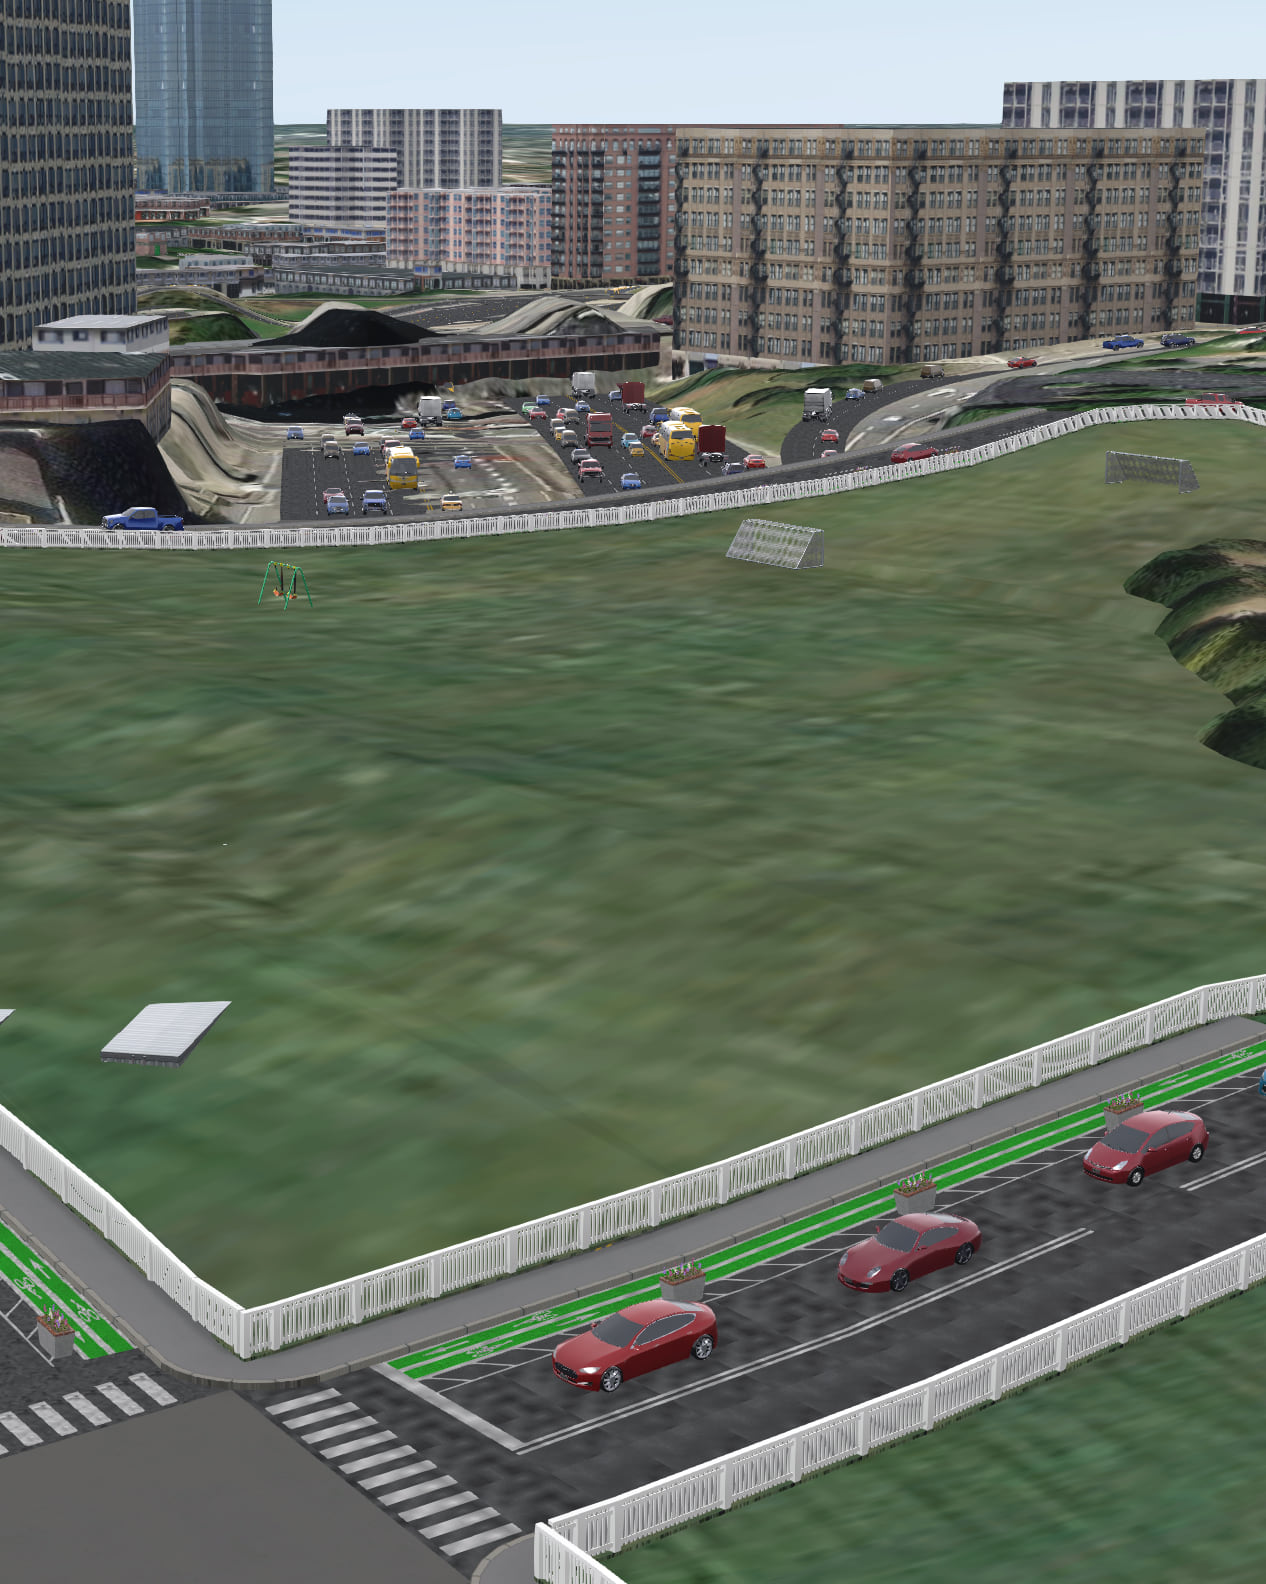 A screenshot from a 3D scene of Atlanta from the 2023 reconnecting communities story by USDOT.